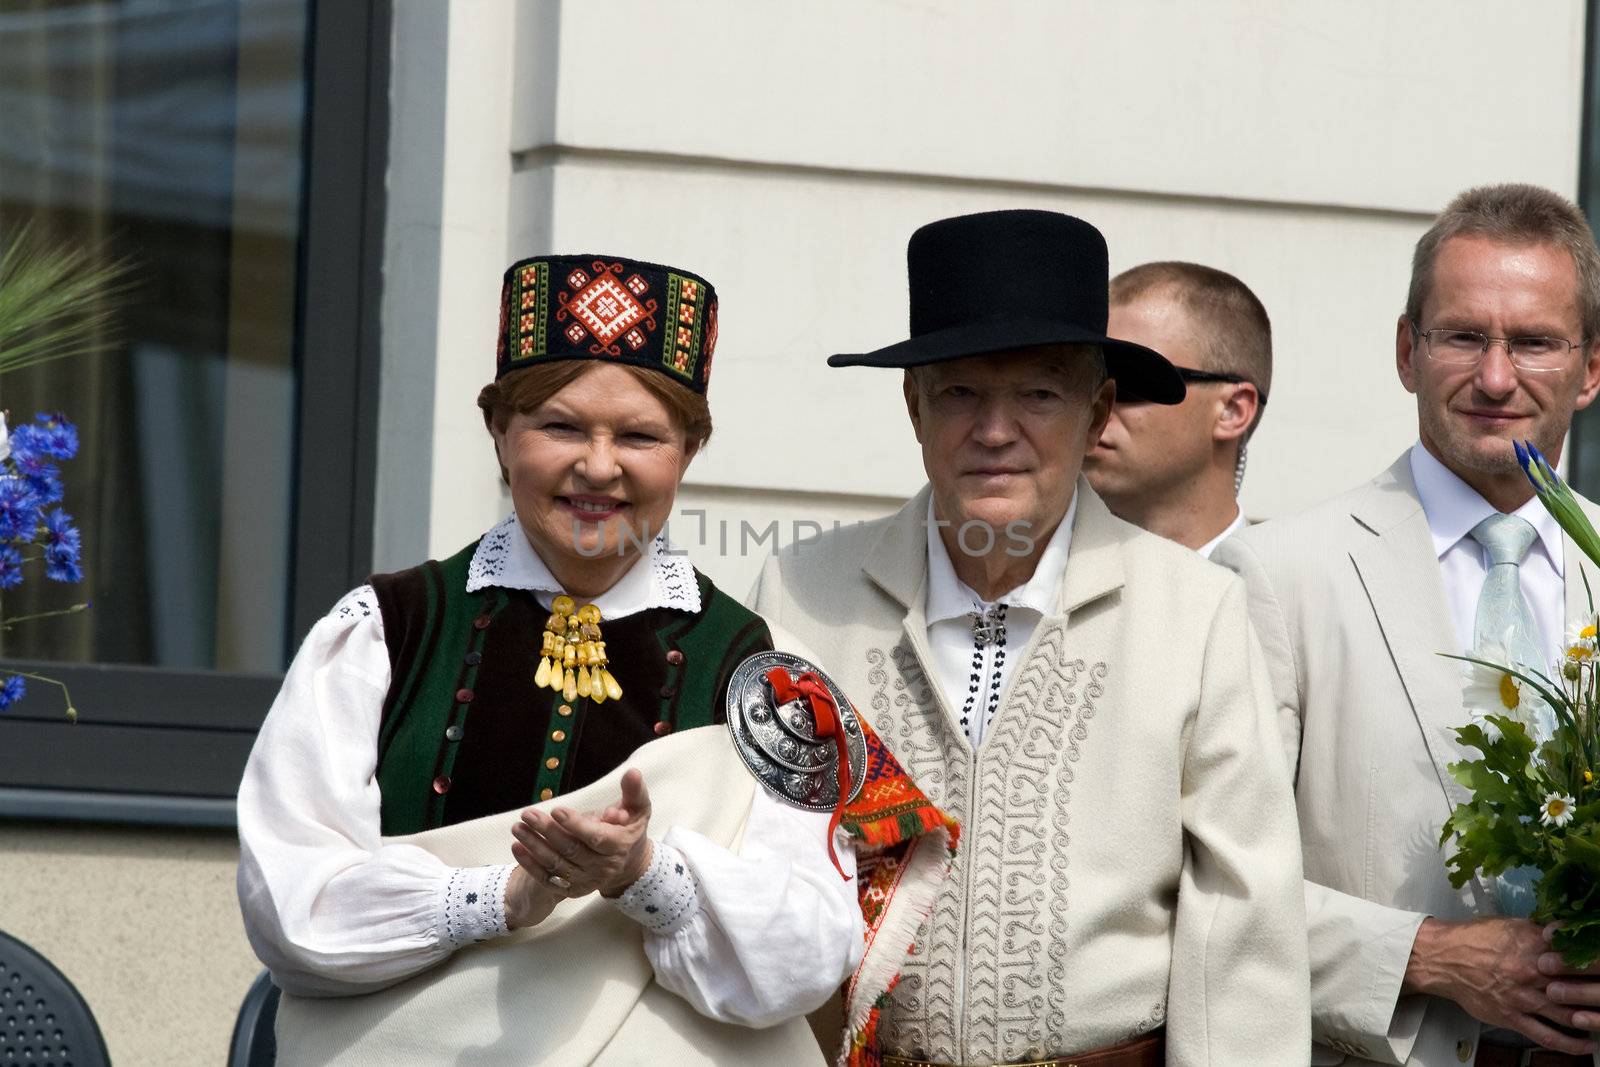 Ex-President of the Republic of Latvia Vaira Vike-Freiberga and her husband wearing traditional costume greets the participants of the procession of the Song and Dance Celebration festival in Riga, Latvia, July 6, 2008